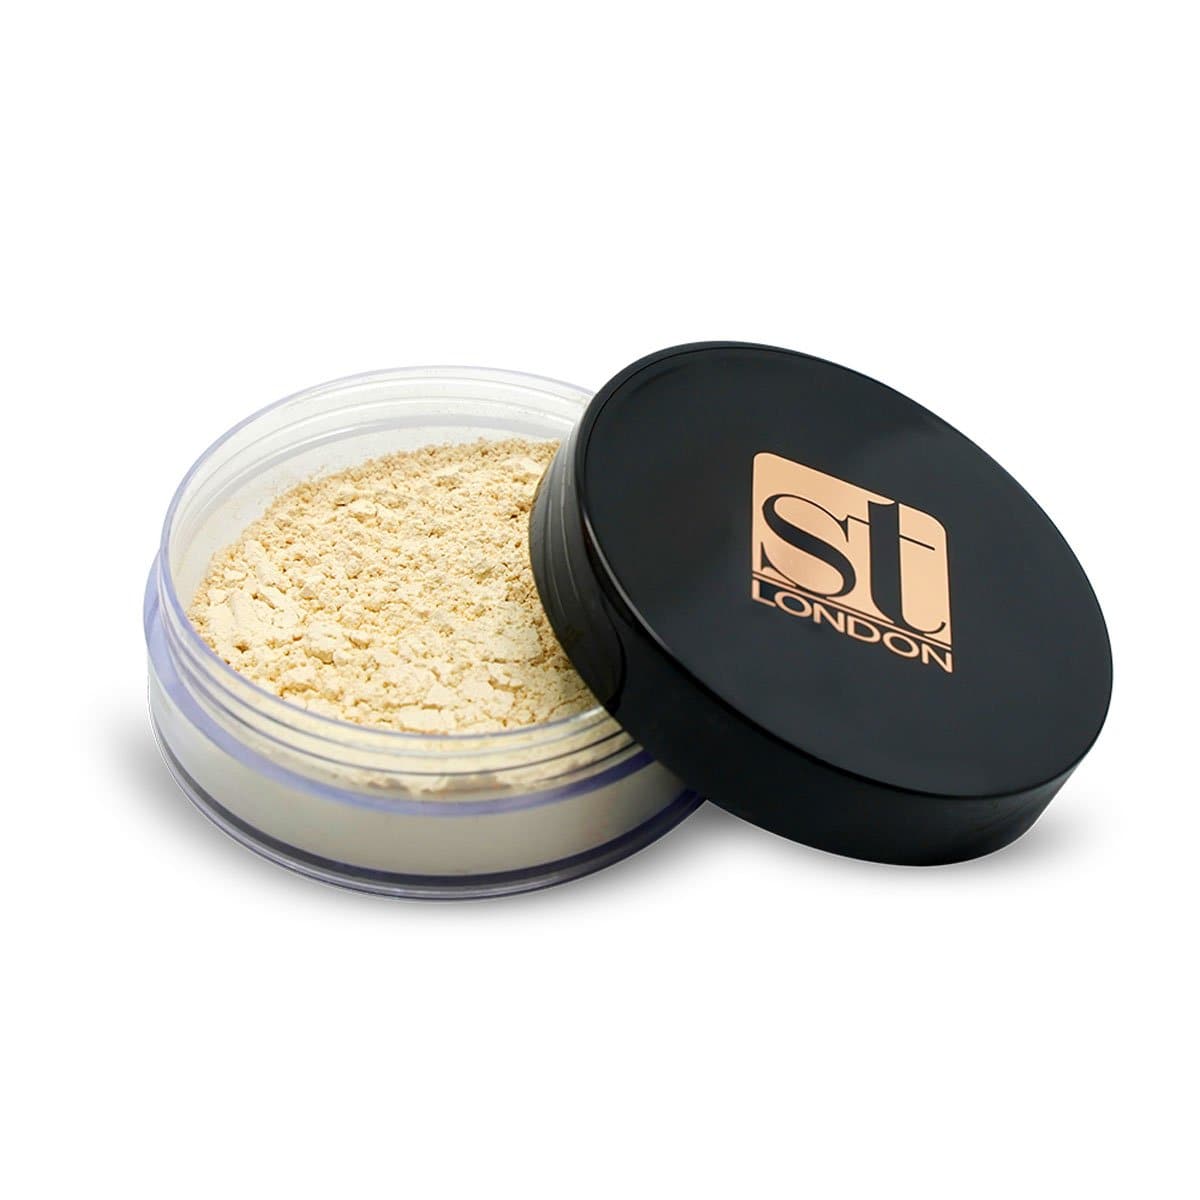 ST London Mineralz Loose Powder - Sand - Premium Health & Beauty from St London - Just Rs 2640.00! Shop now at Cozmetica